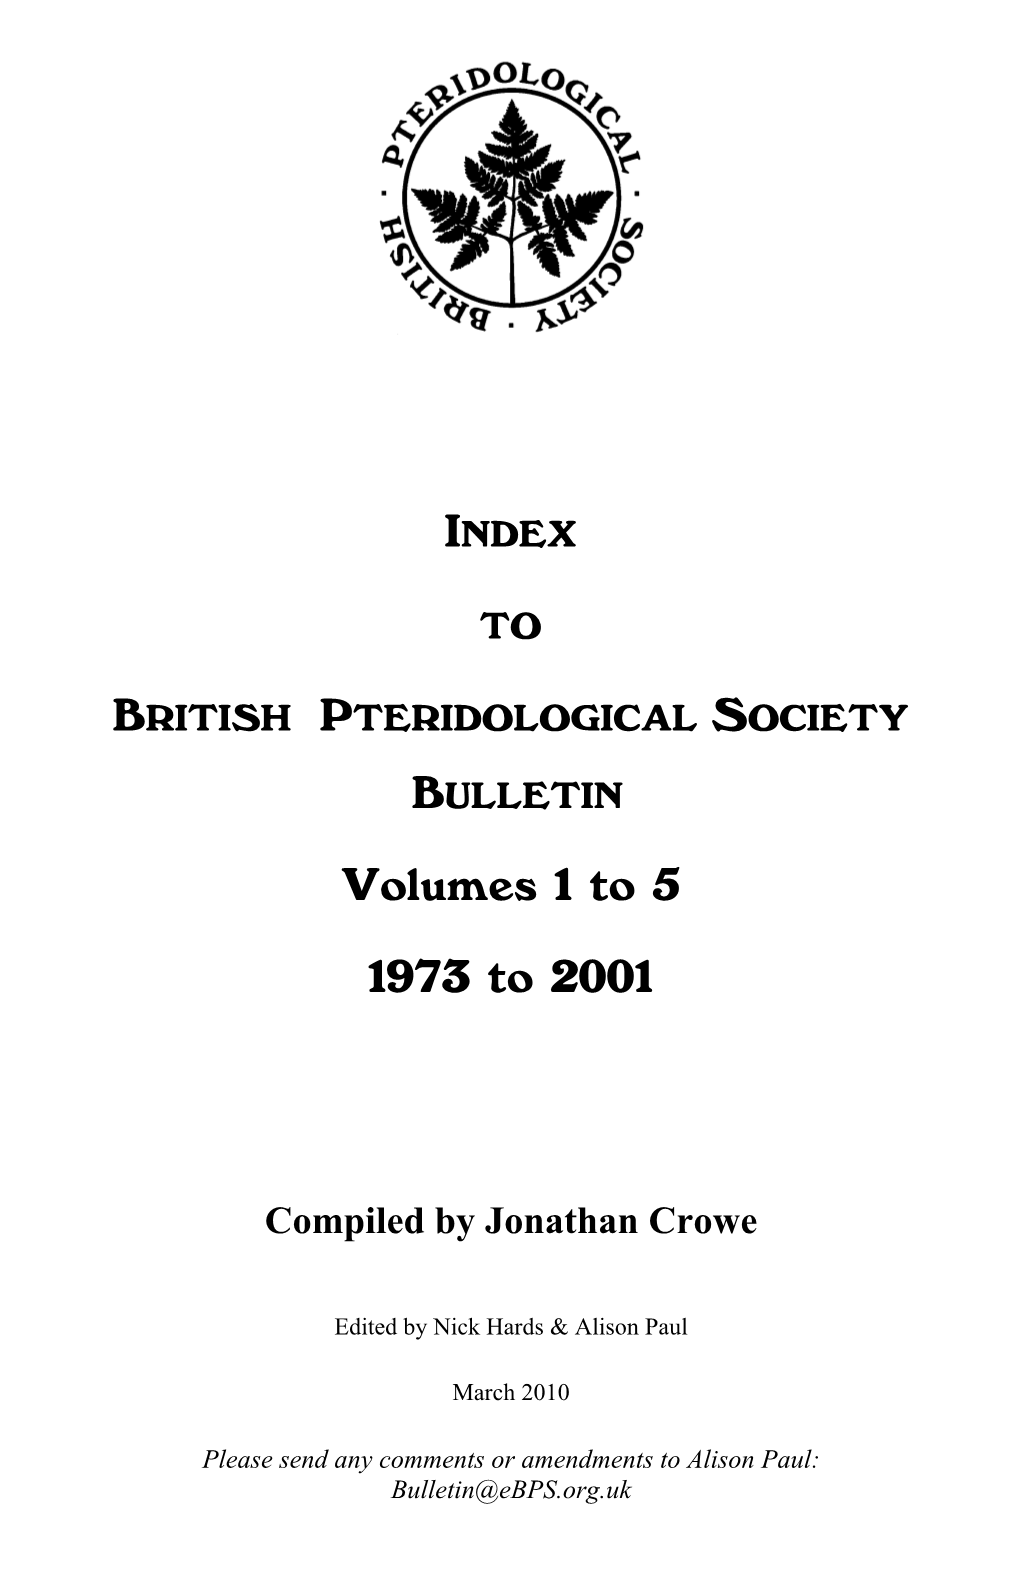 Volumes 1 to 5 1973 to 2001